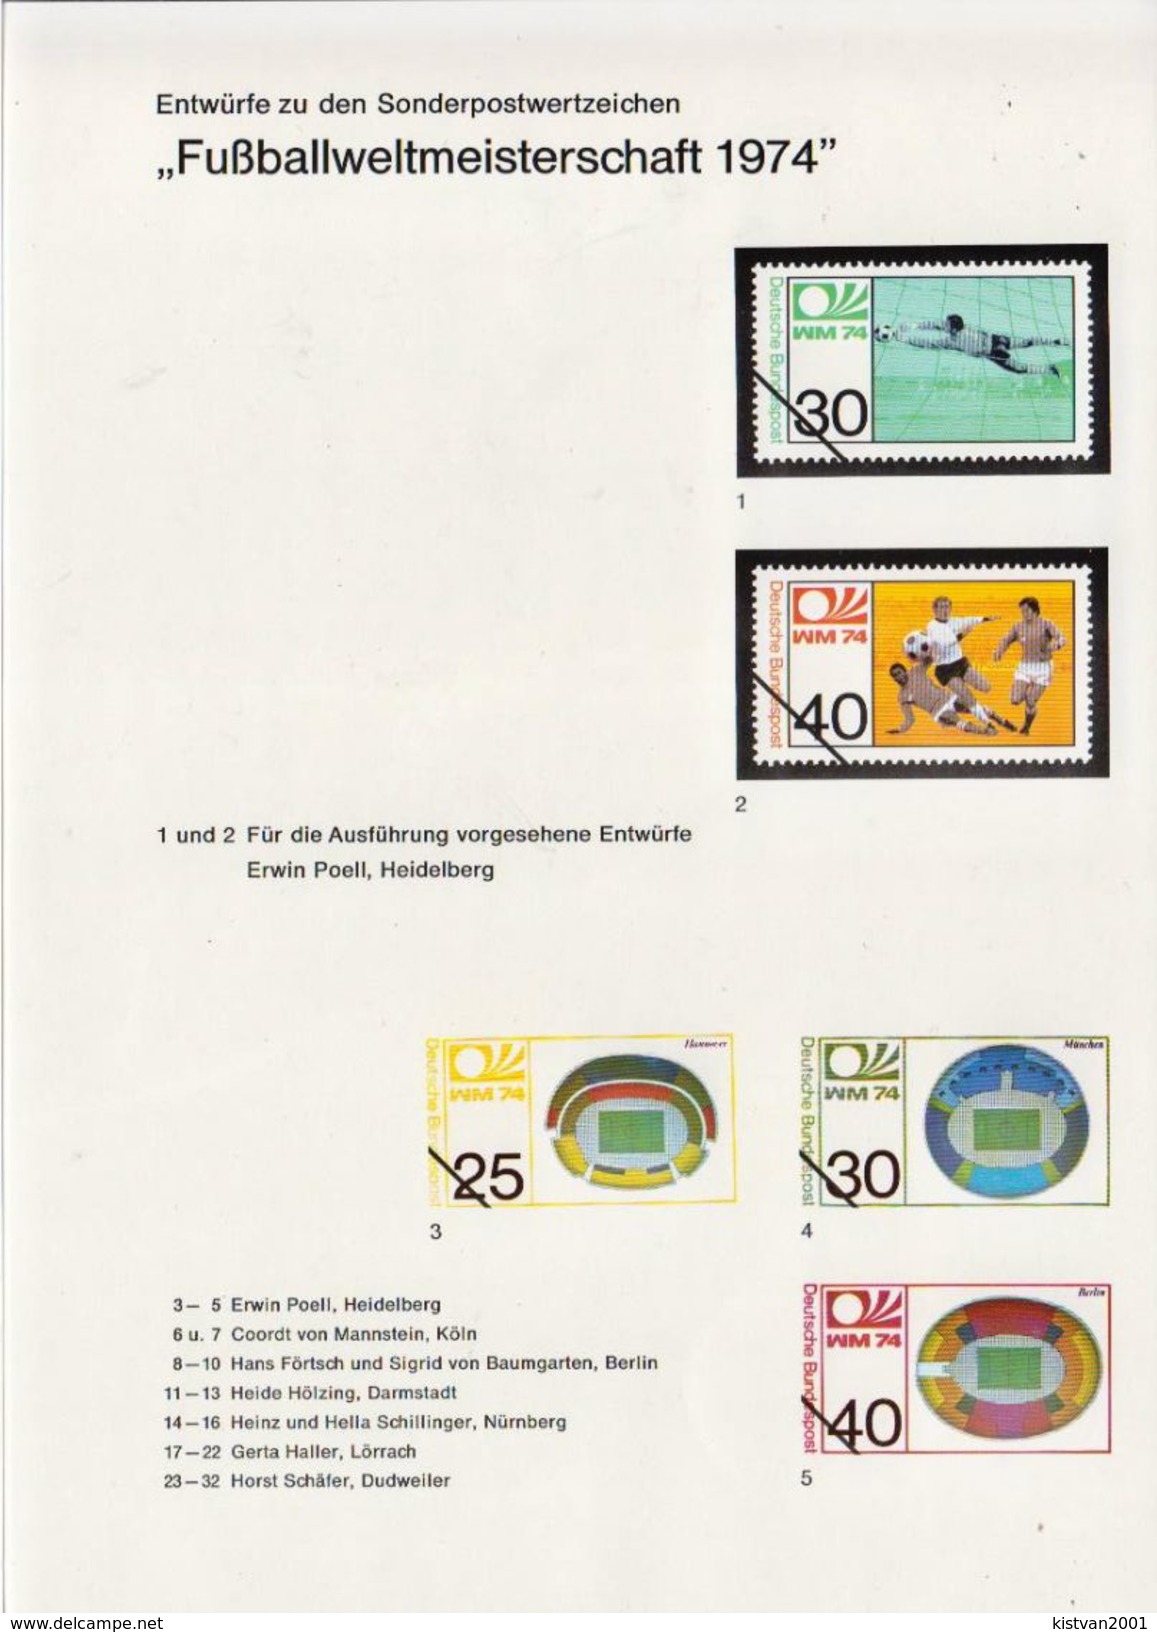 Germany Football World Cup Stamps Designs On 3 Leaflets - 1974 – West Germany